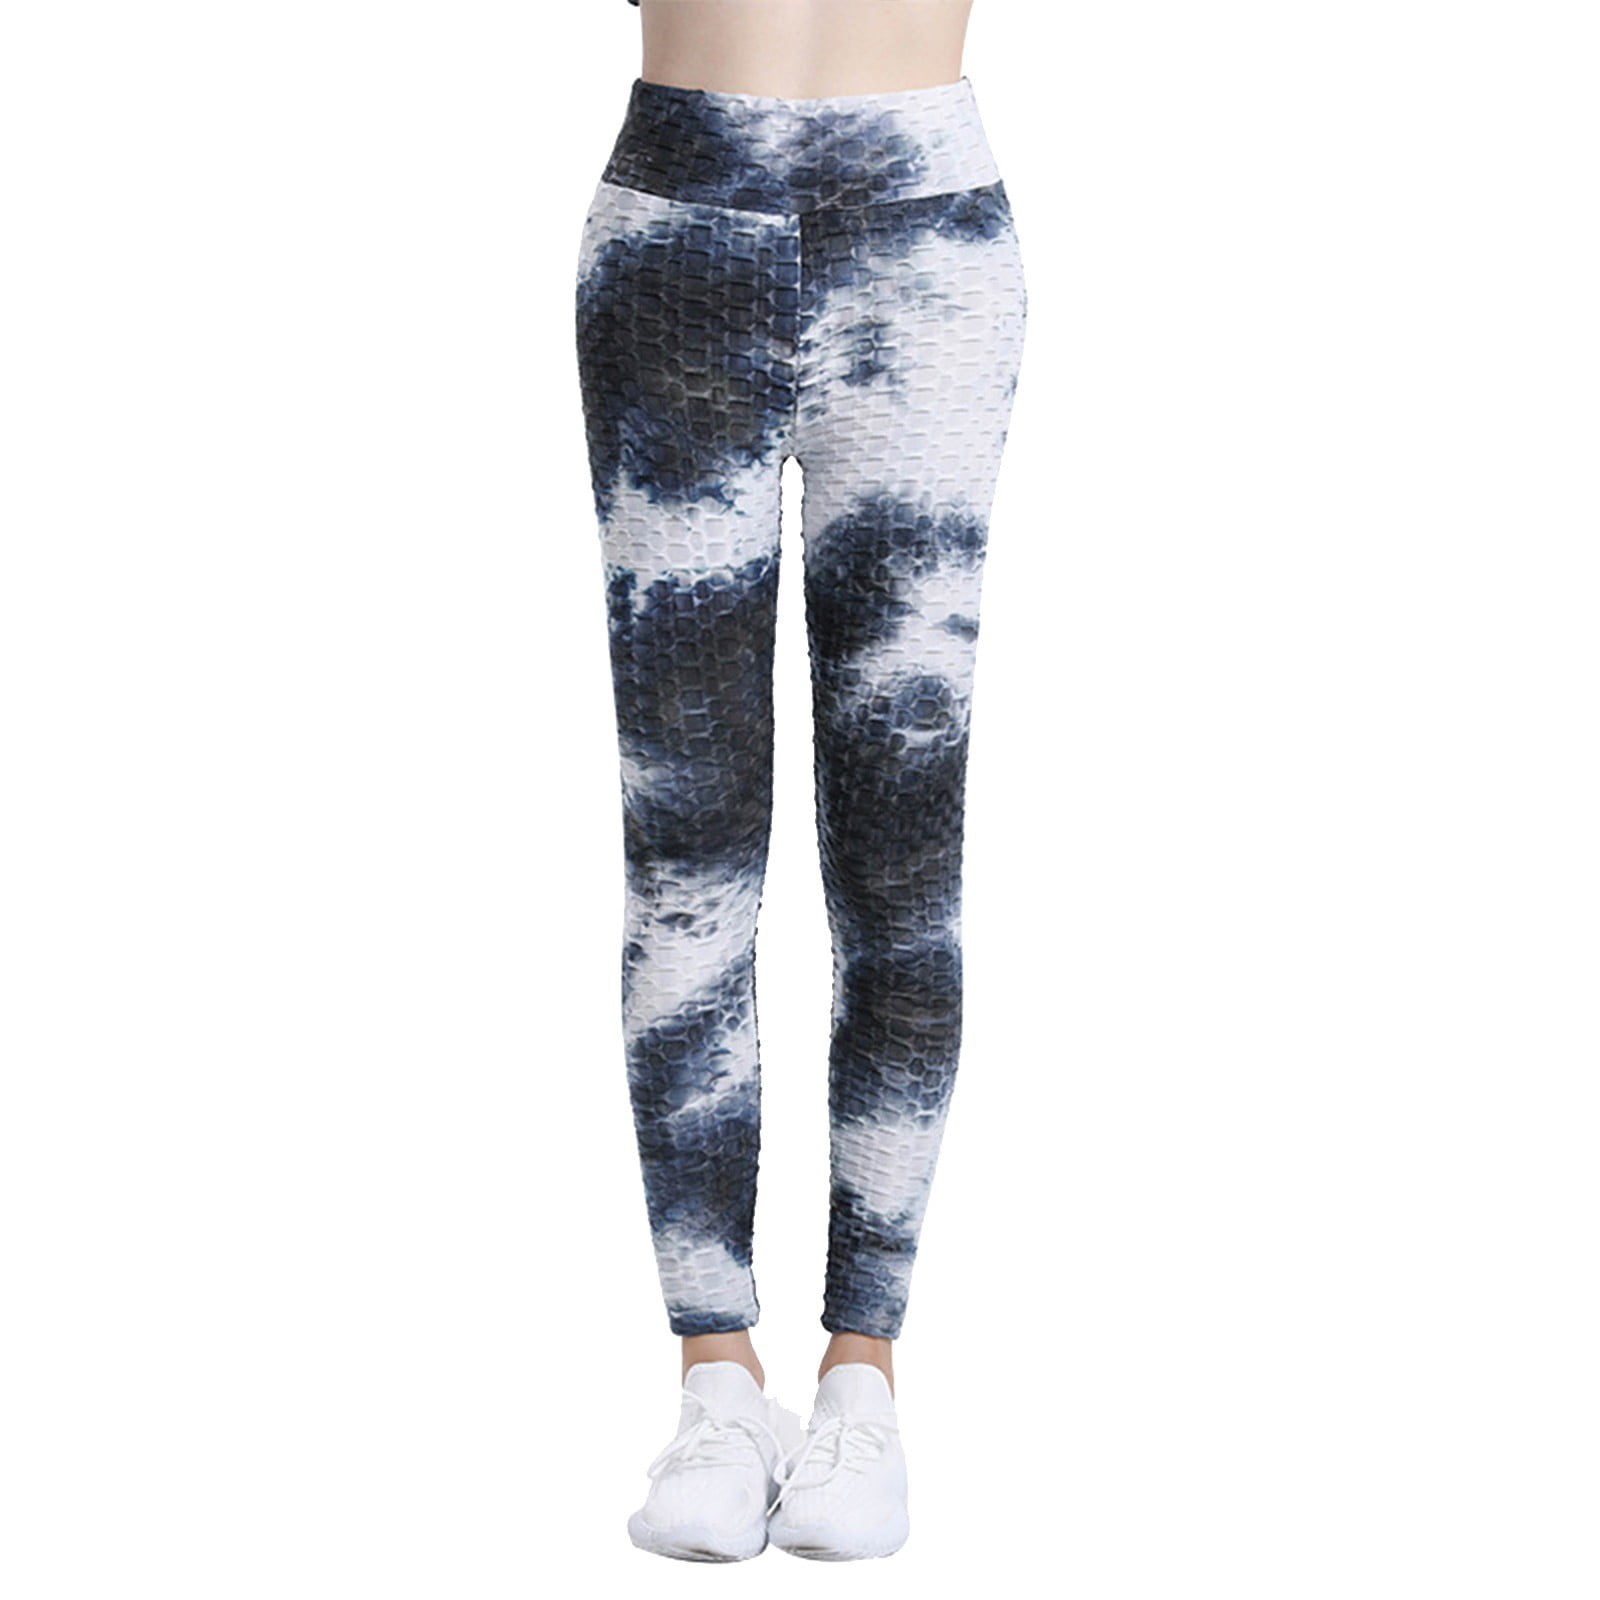 Womens Yoga Pants Women's Seamless Feeling High Waist Lifting Fitness Pants  For Running Wear Sports Tie Dyed Bubble Yoga Pants For Women Trendy 